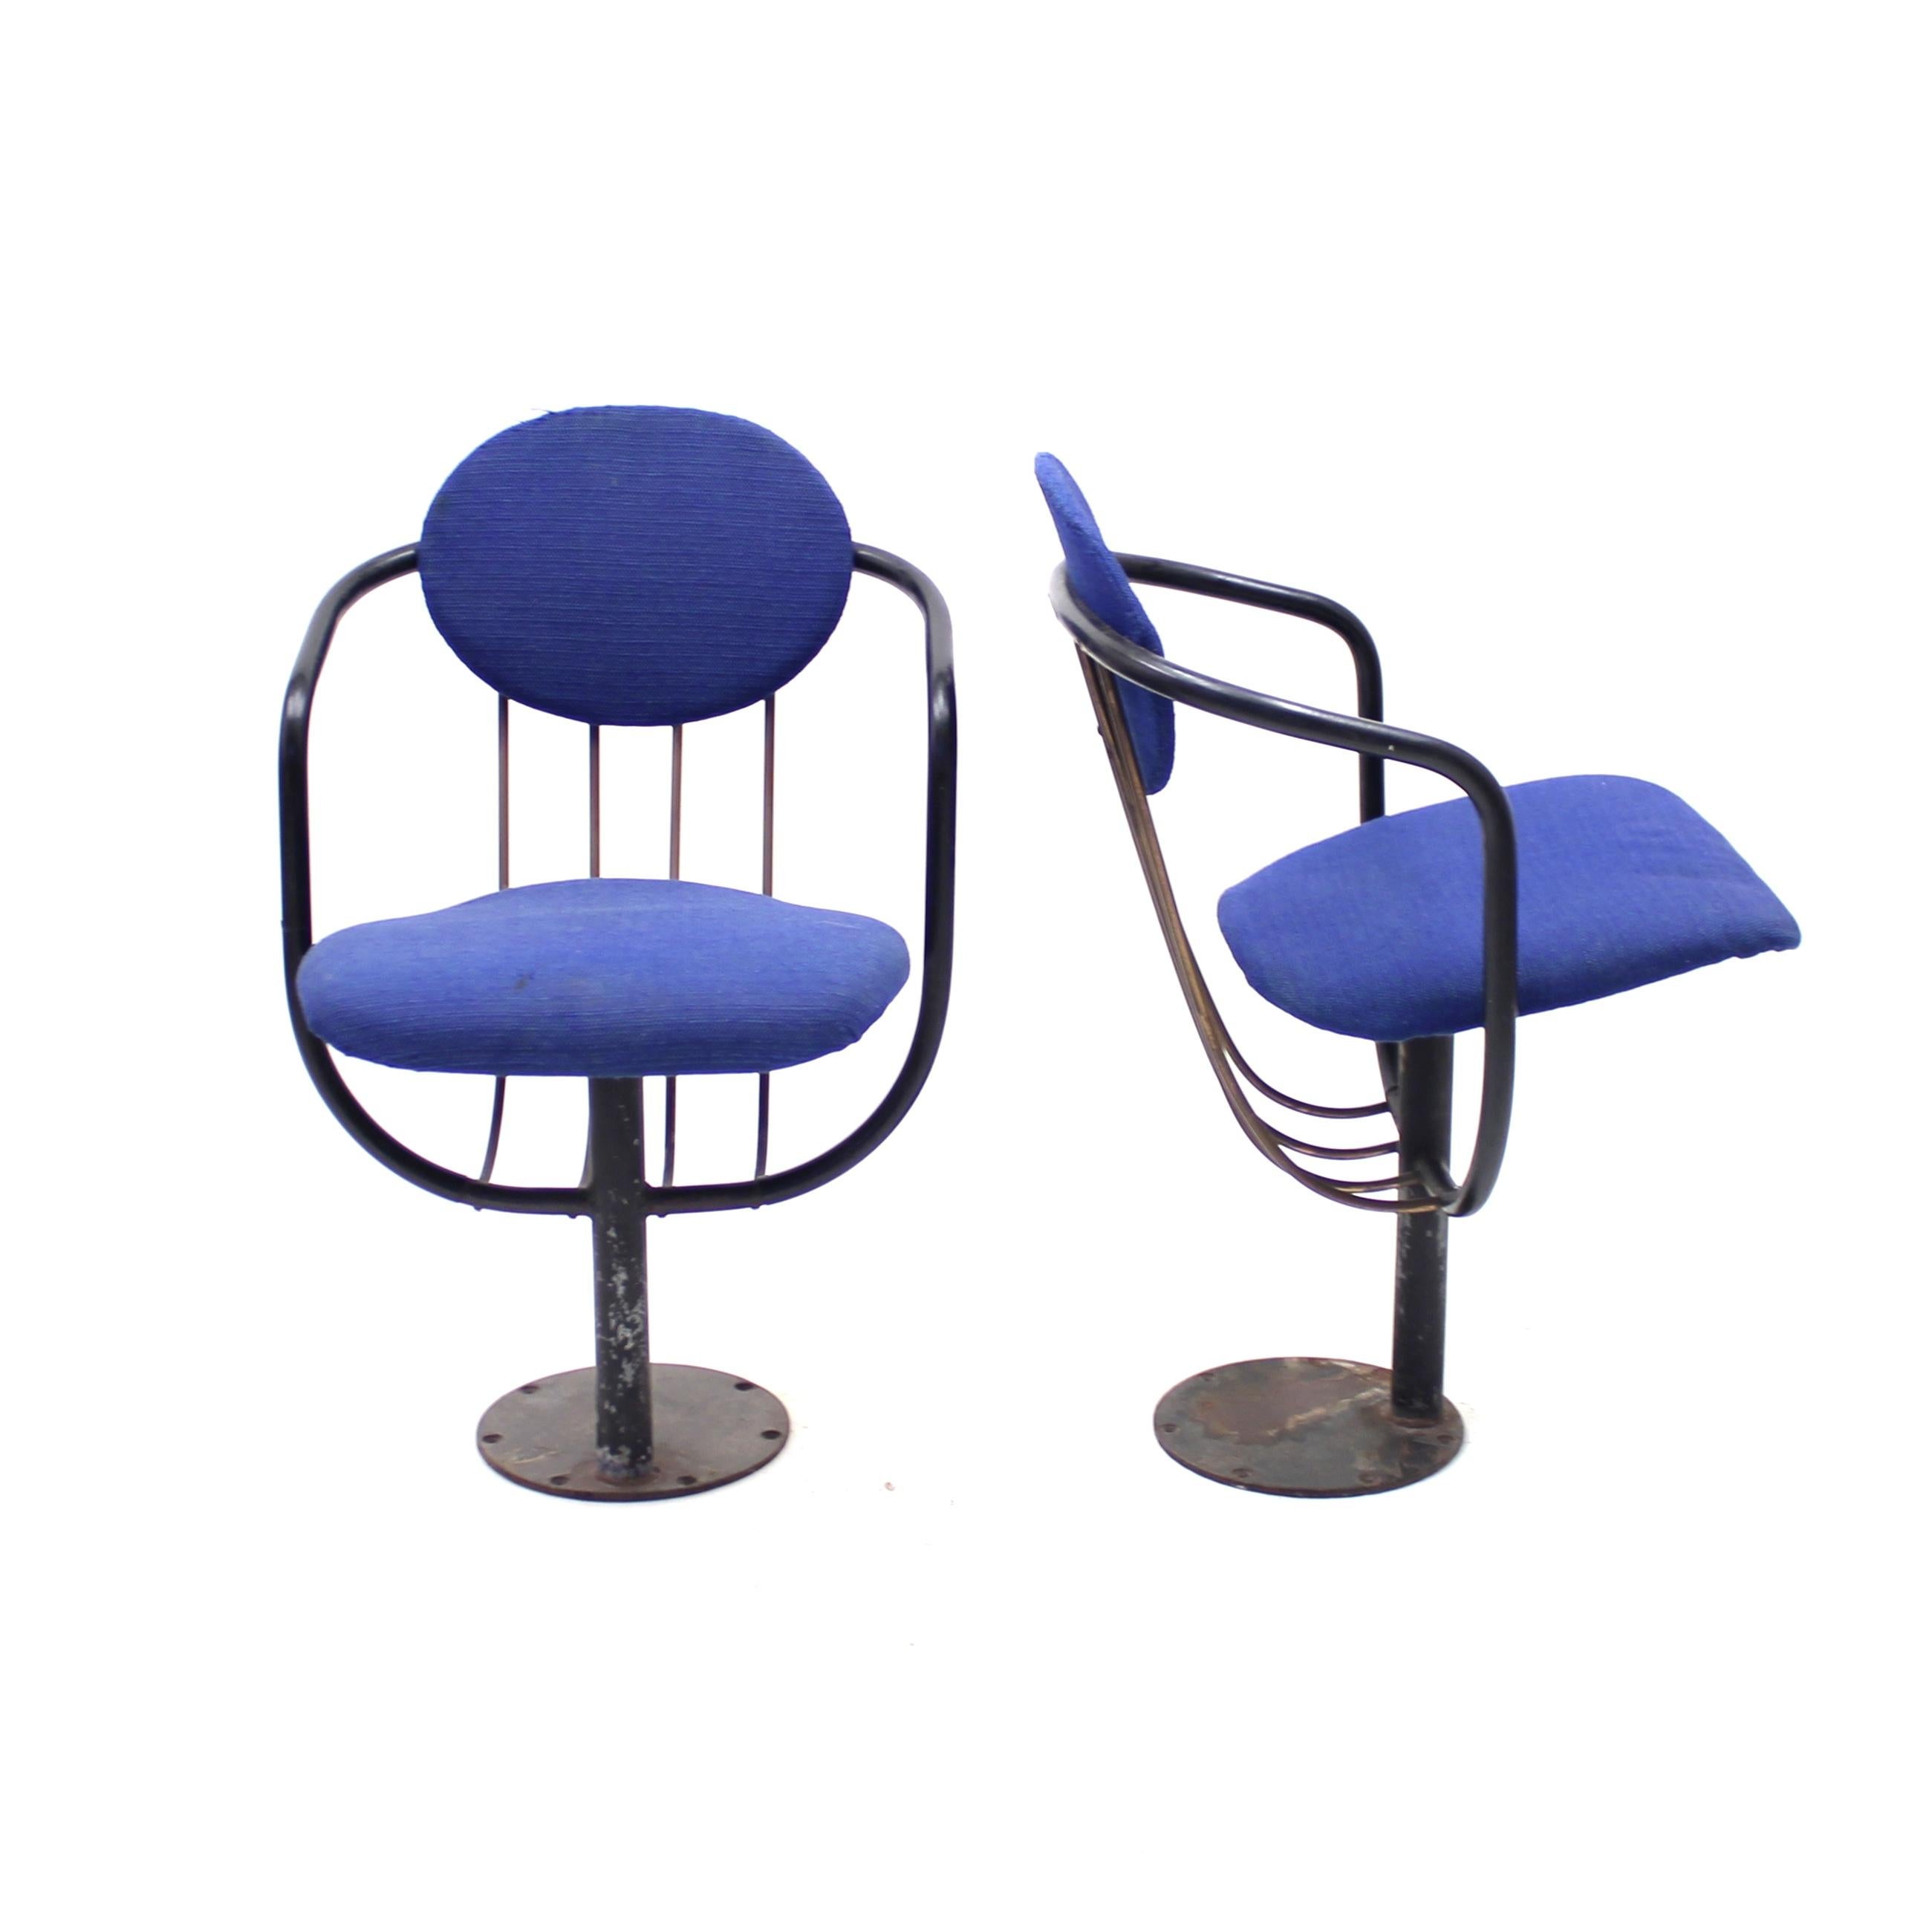 Rare pair of foldable theatre chairs designed by Poul Henningsen in 1957 for the renovation of the Betty Nansen Theatre (earlier The Young Theatre) in Copenhagen and made by Andreas Christensen. The chairs were featured in the renowned Danish design